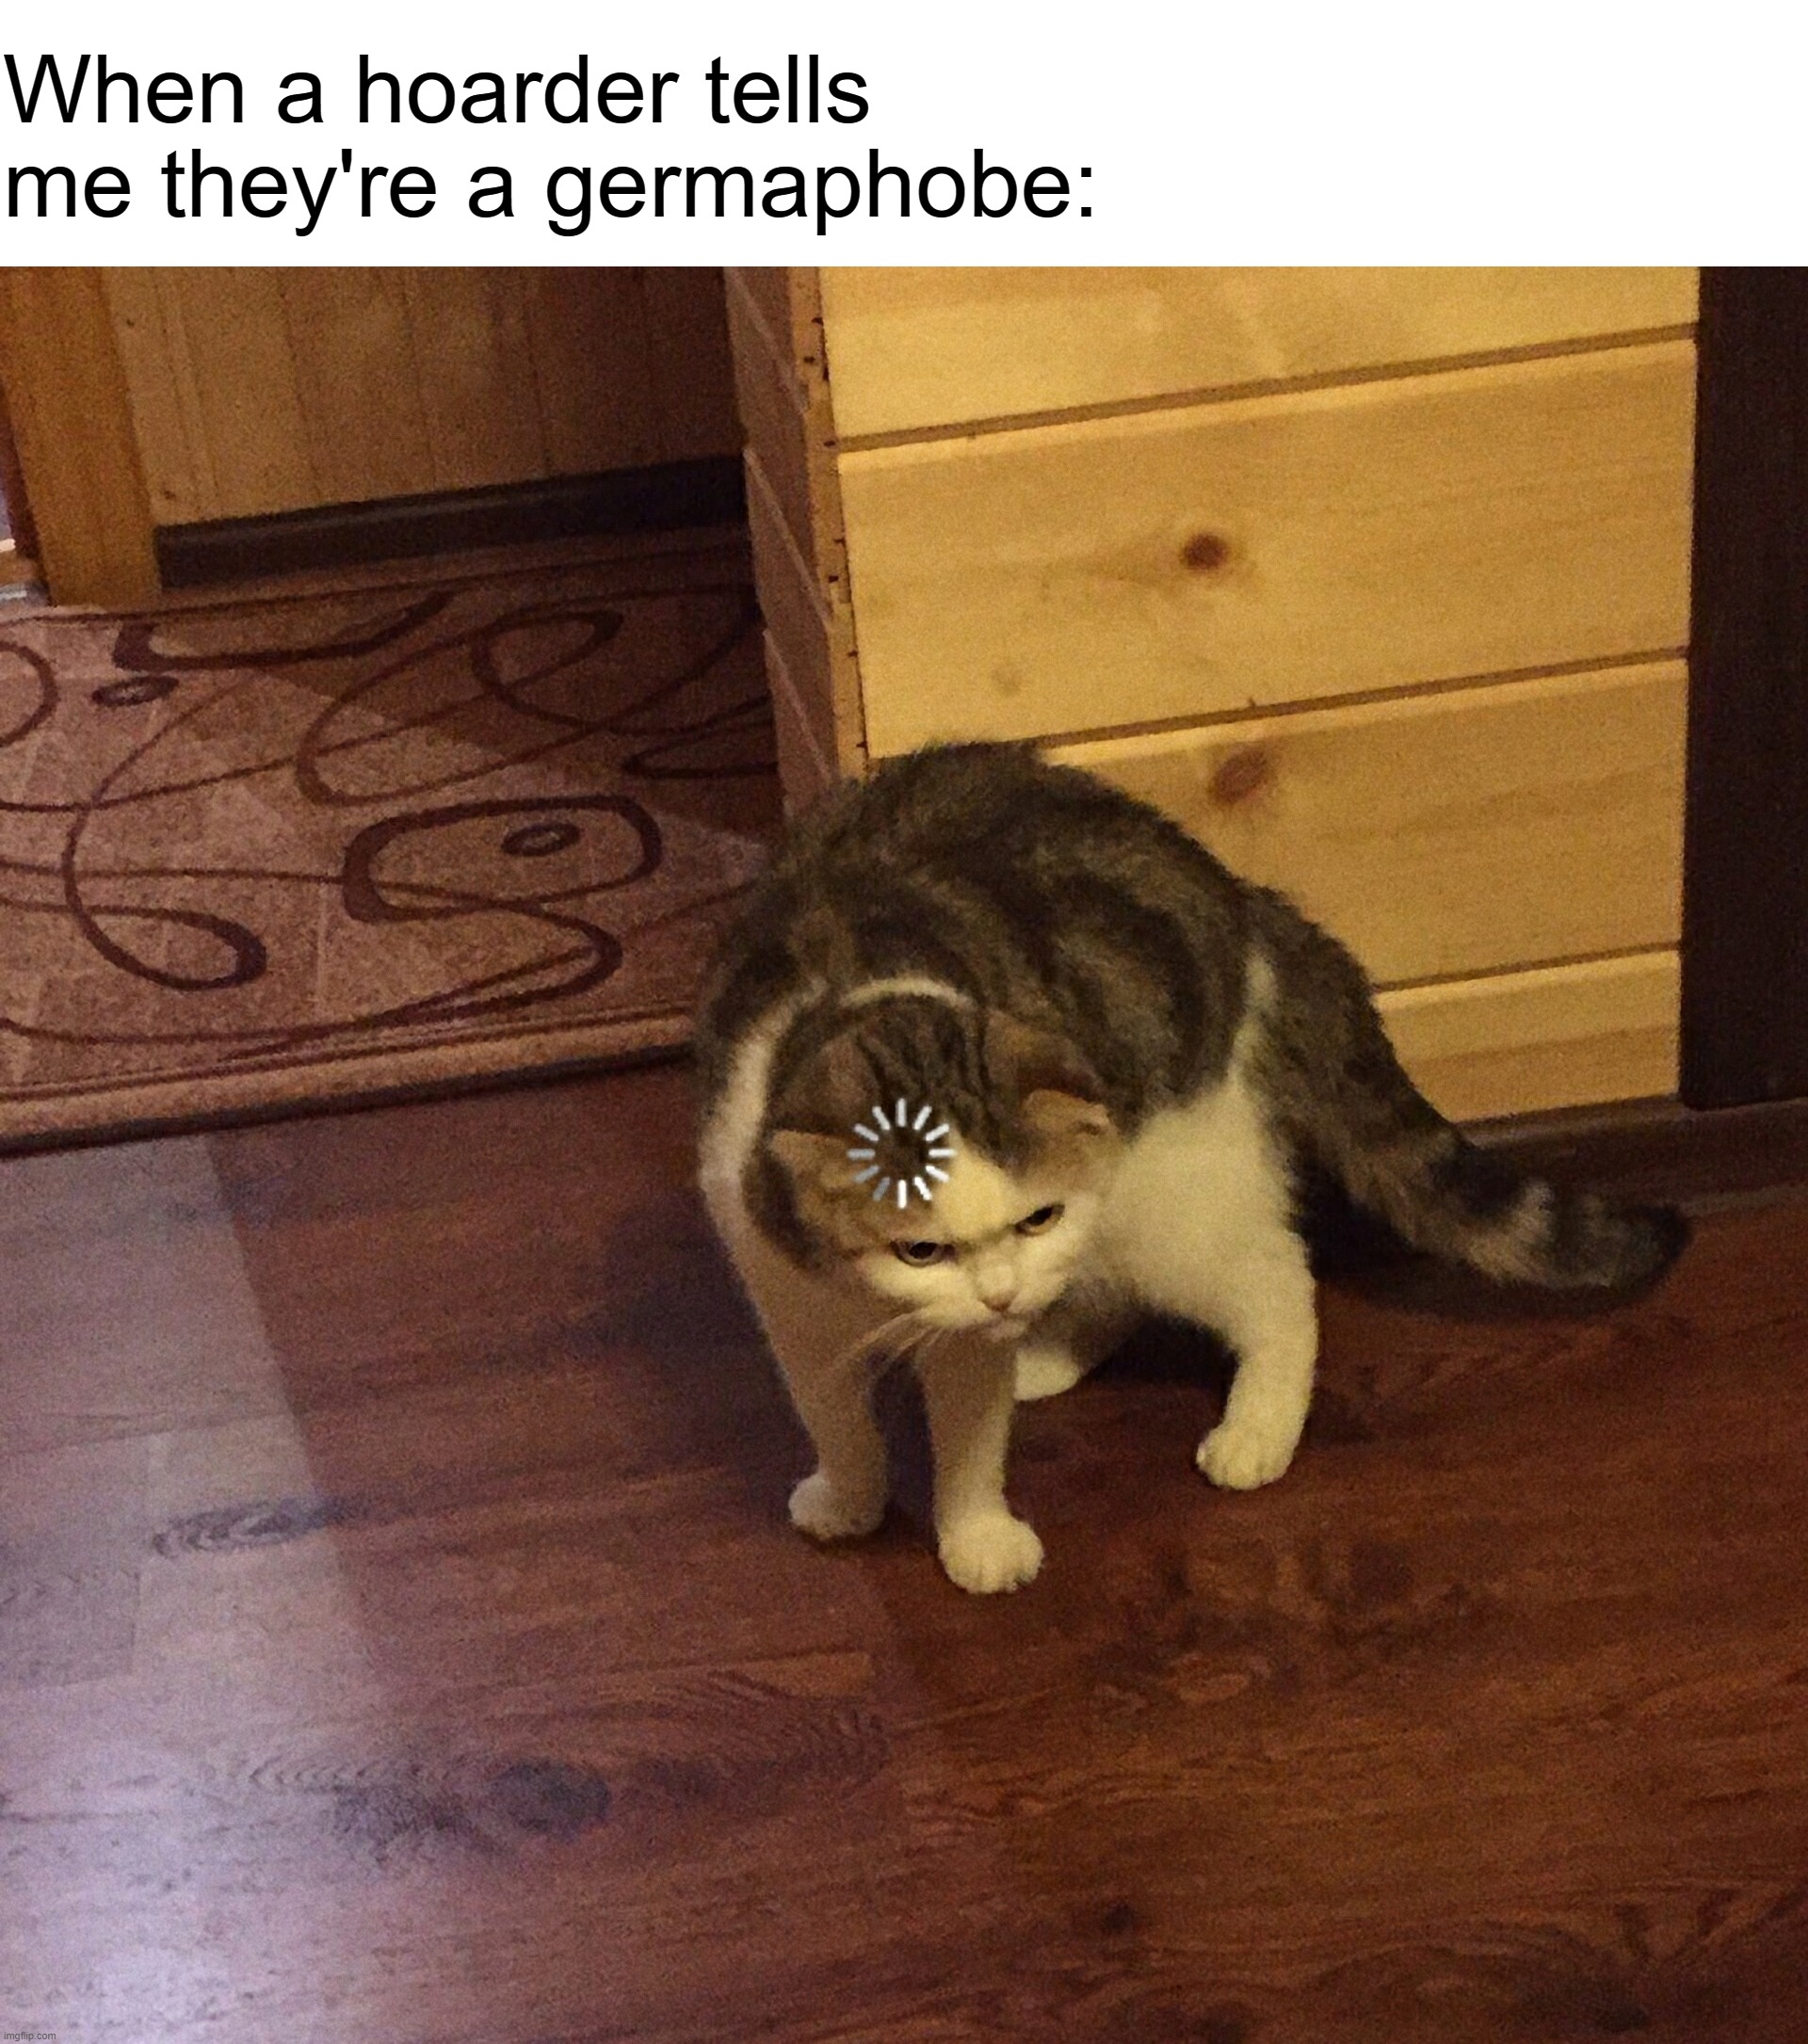 buffering cat | When a hoarder tells me they're a germaphobe: | image tagged in buffering cat | made w/ Imgflip meme maker